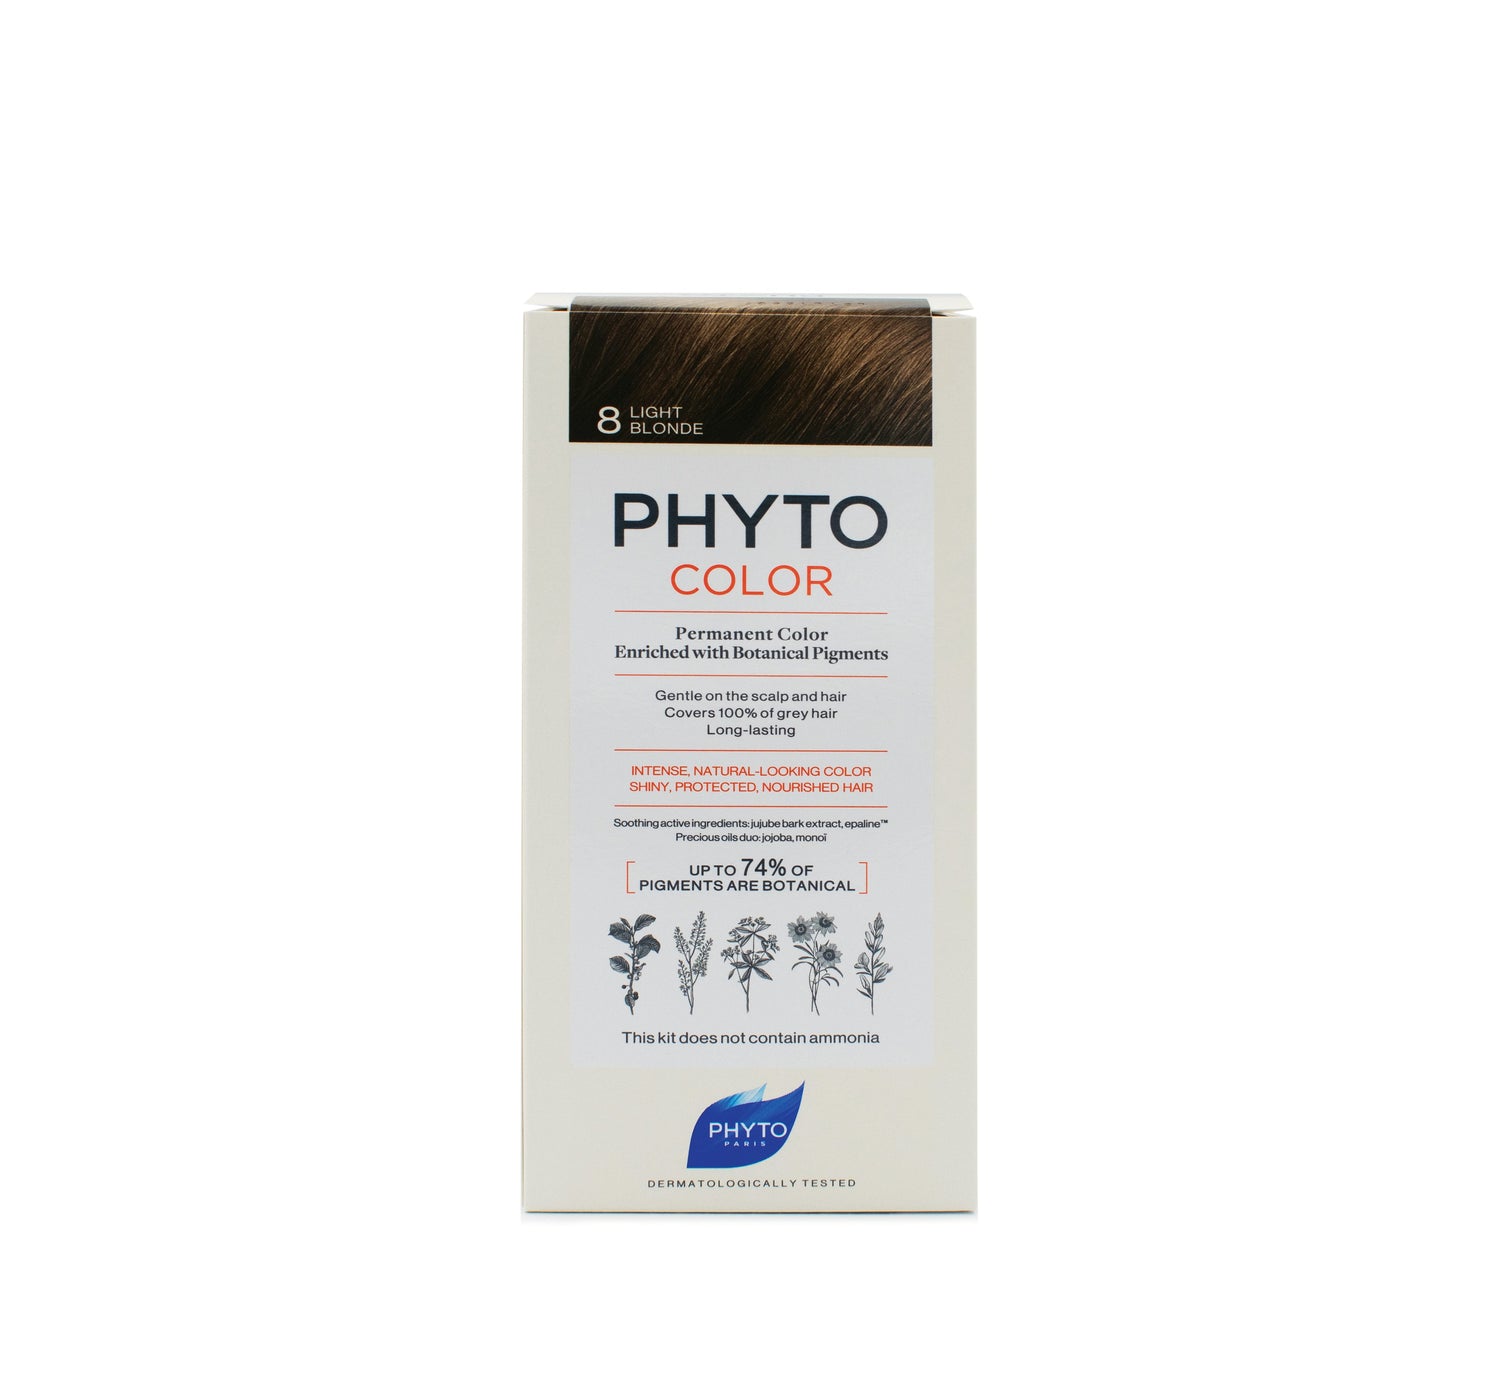 Phyto - Phytocolor 8 Light Blonde Permanent Coloring